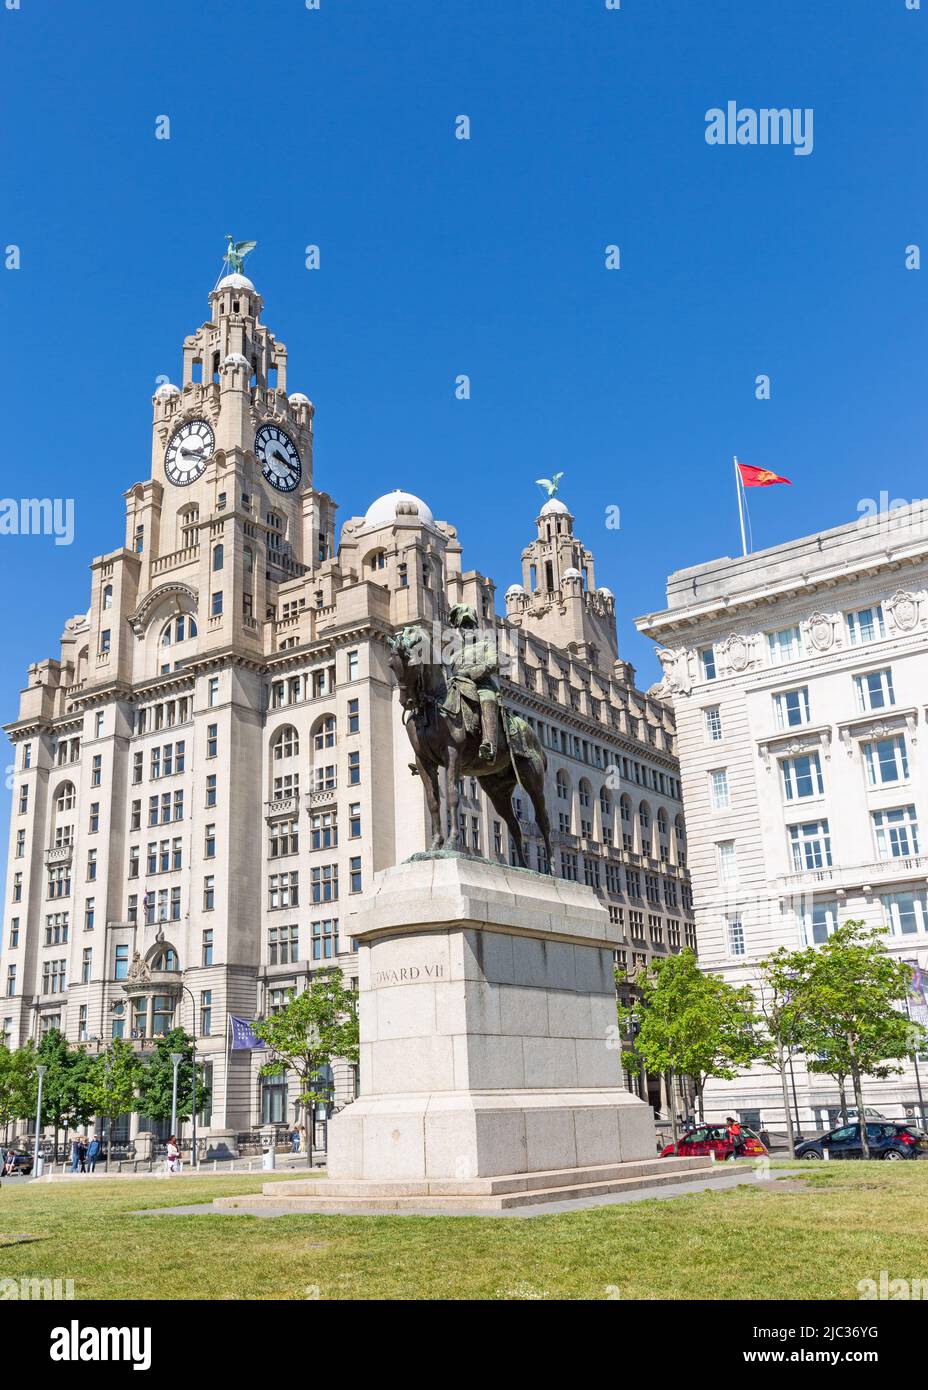 Statue of Edward VII and Royal Liver Building, Pier Head, Liverpool, England, UK Stock Photo